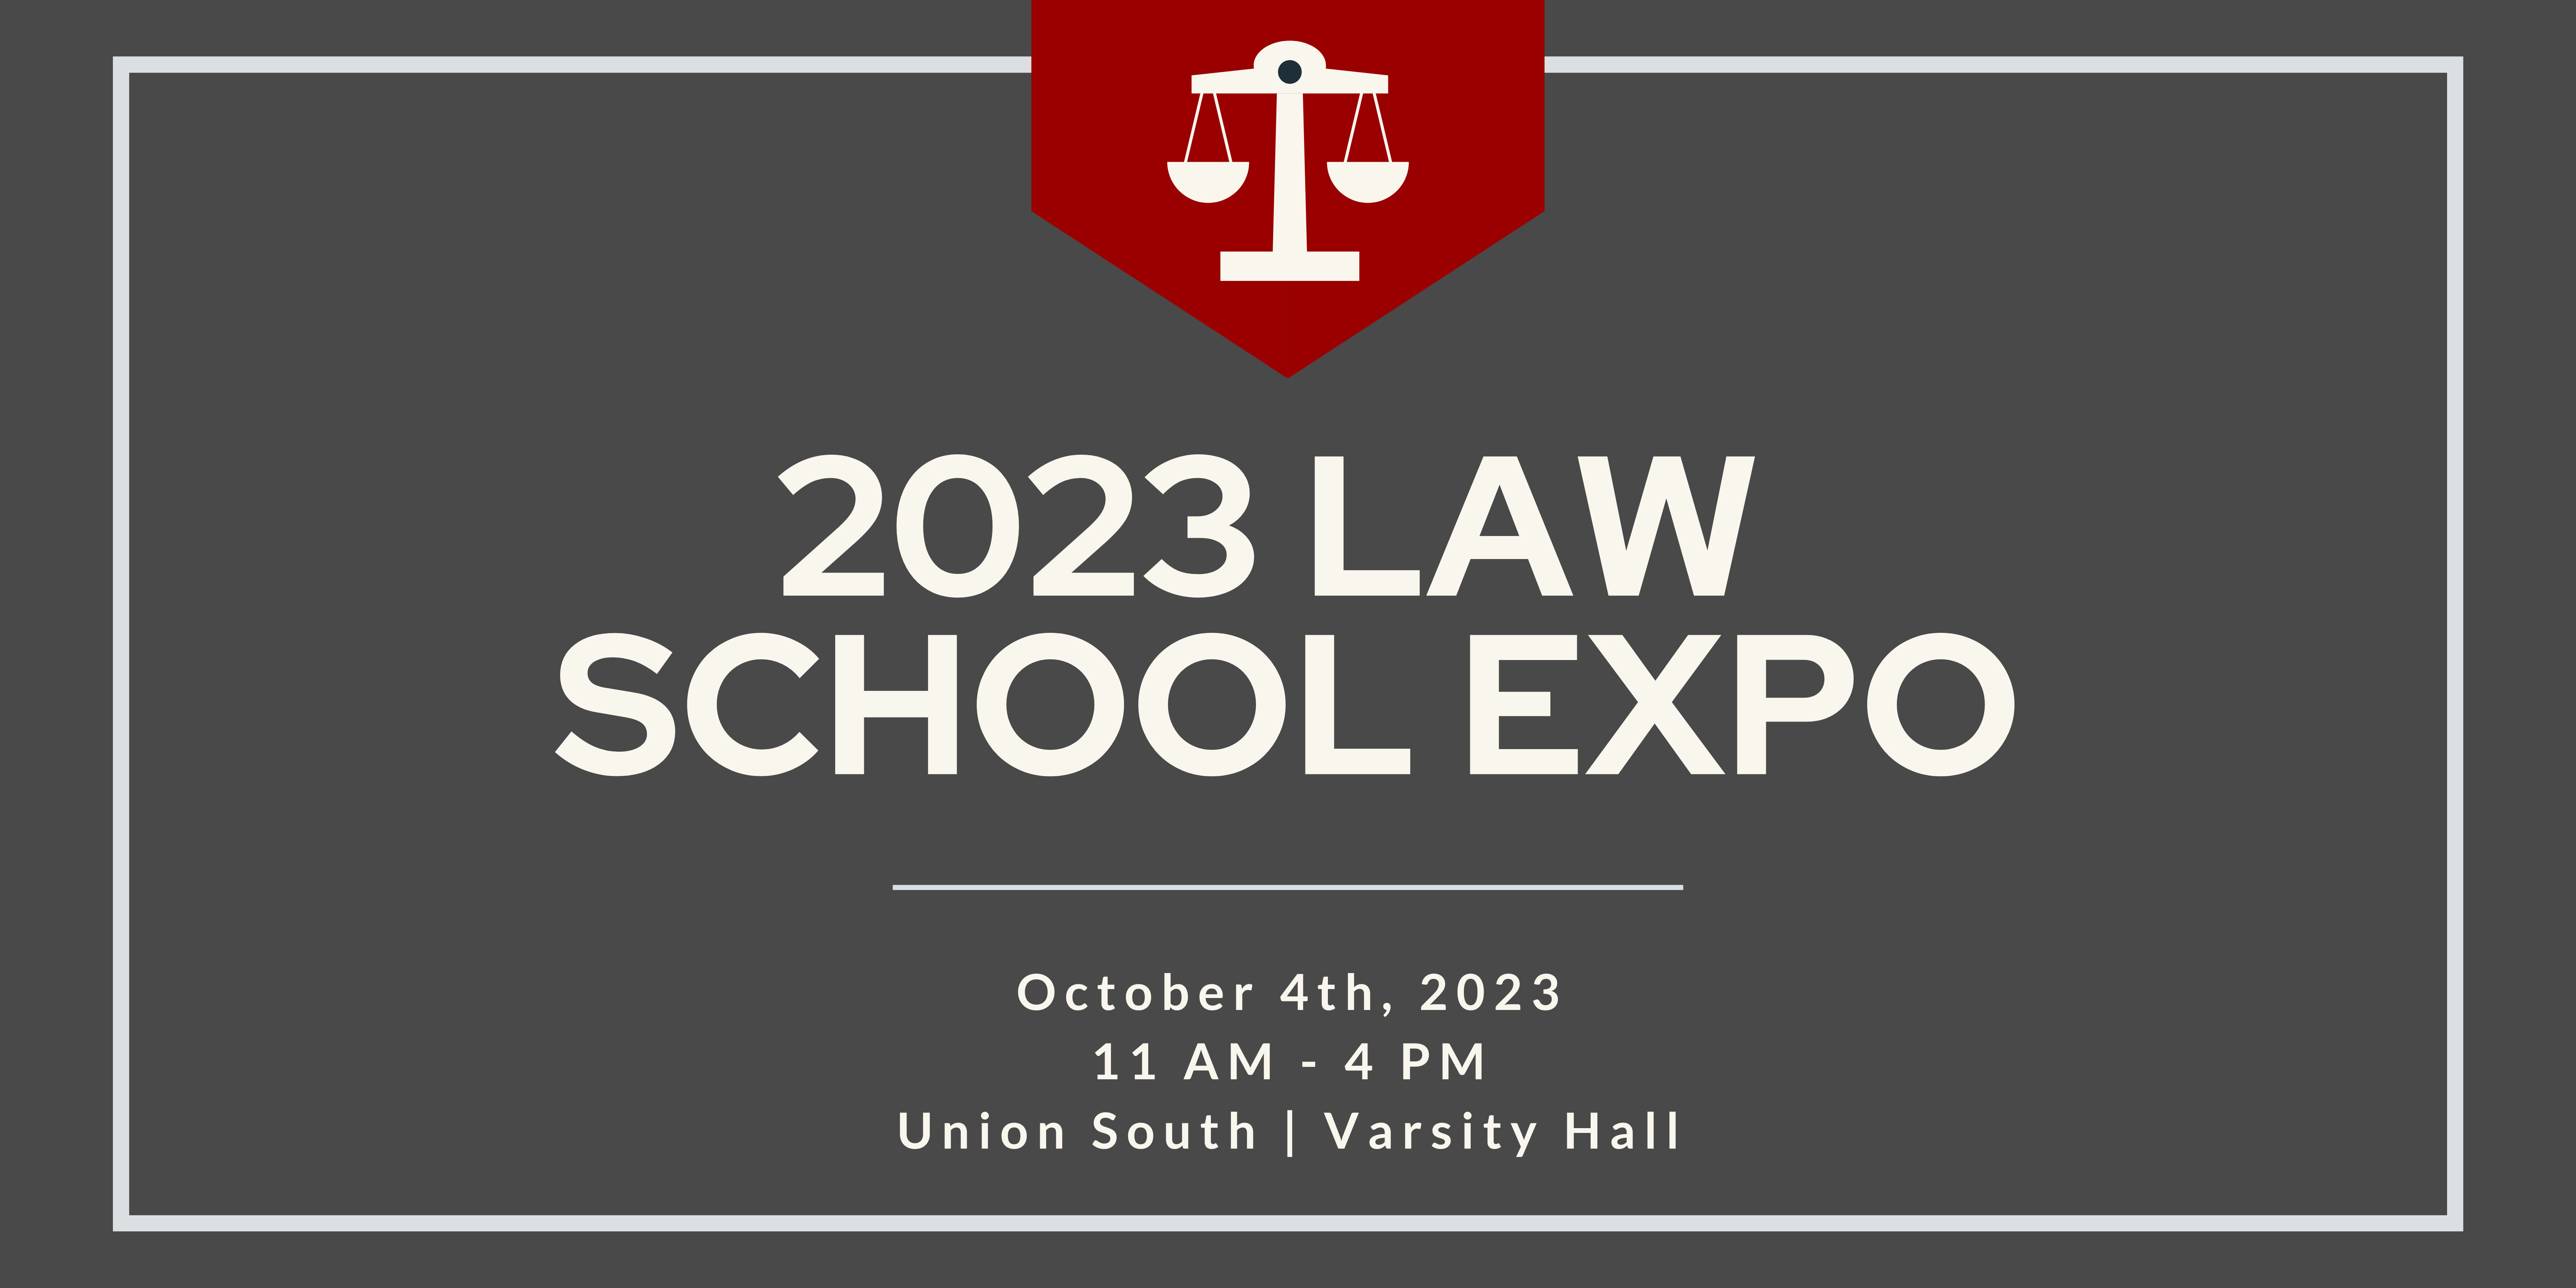 "Fall 2023 Law School Expo" banner promoting the event on October 4th, 2023, from 11 am to 4 pm, held at Union South Varsity Hall.